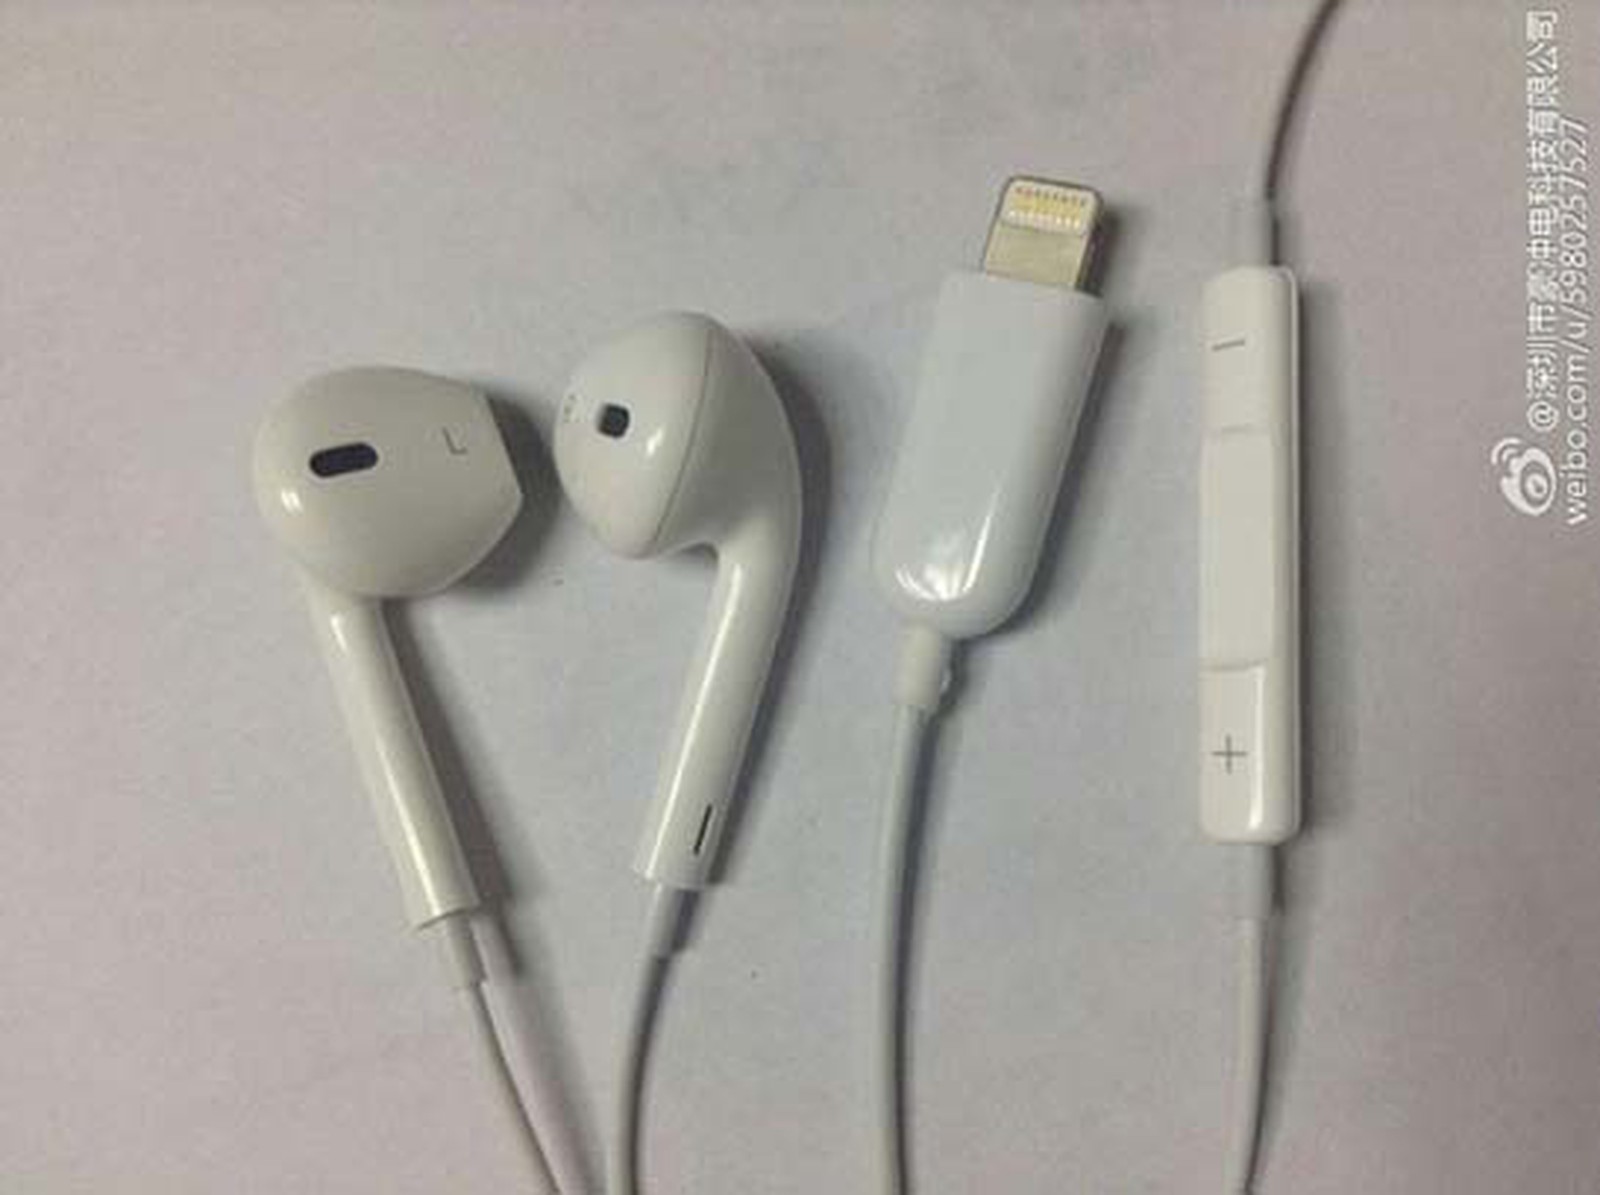 apple earpods with lightning connector stats